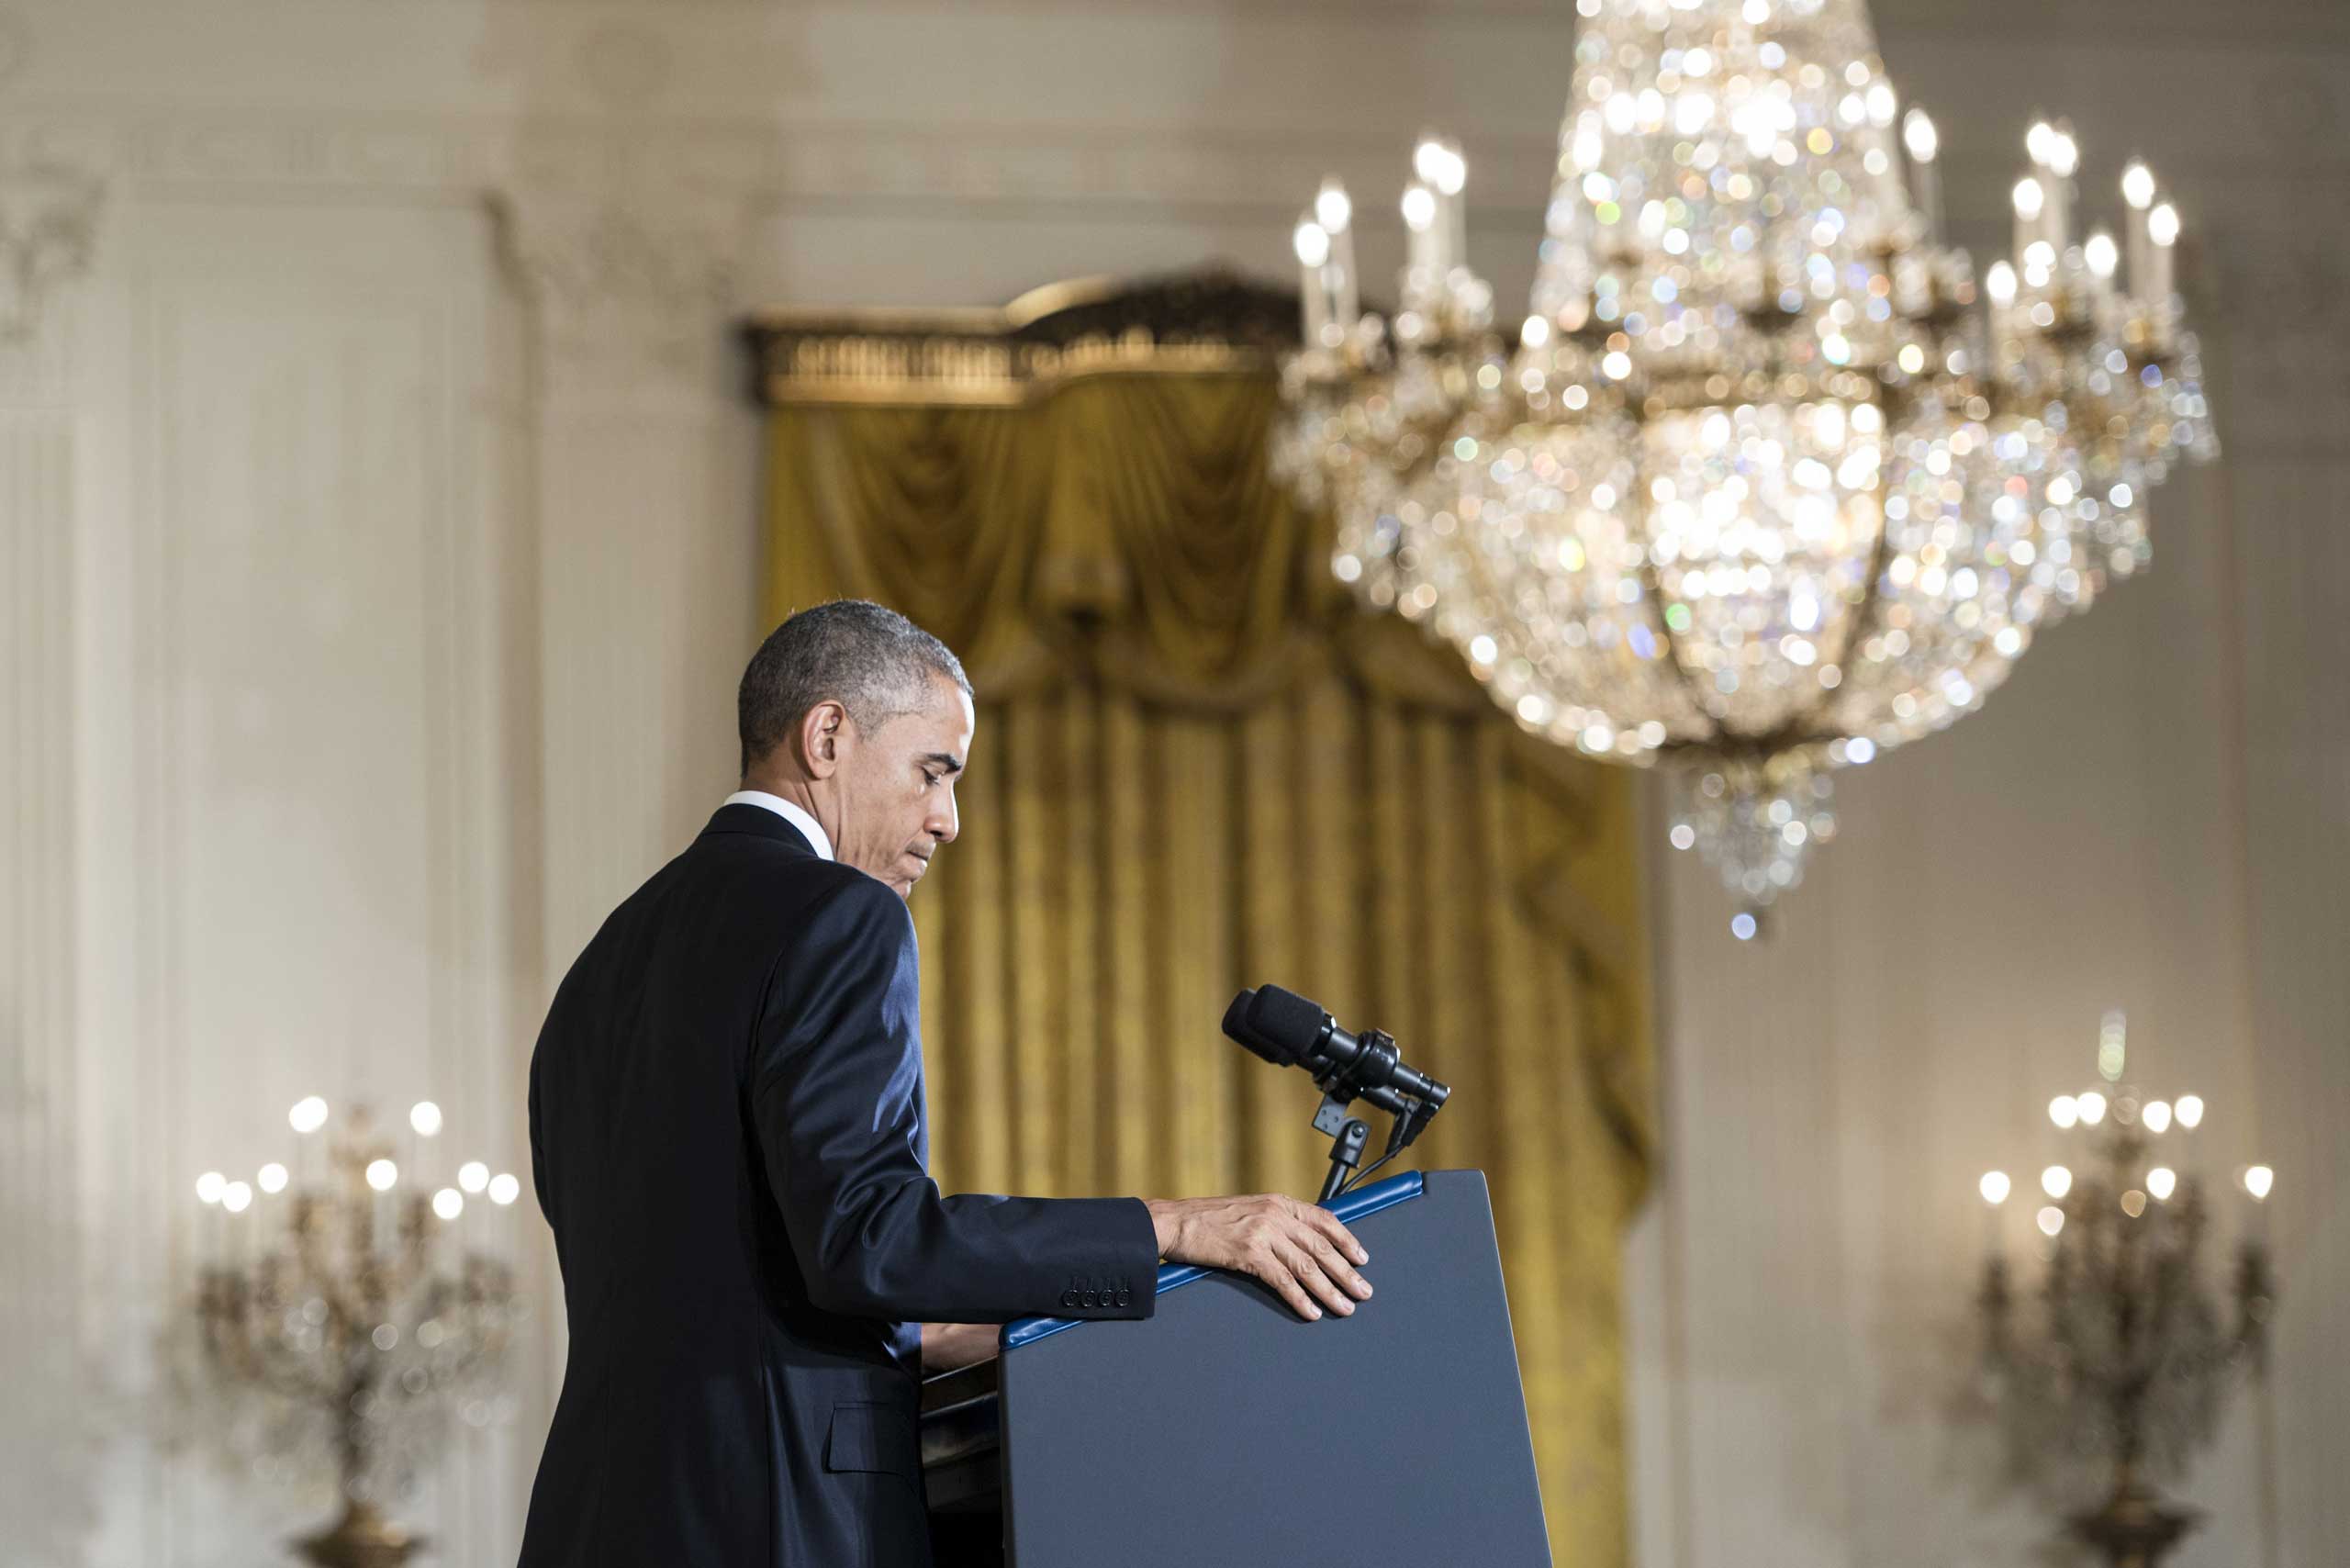 President Barack Obama pauses while speaking during a press conference in the East Room of the White House in Washington on Nov. 5, 2014. (Brendan Smialowski—AFP/Getty Images)